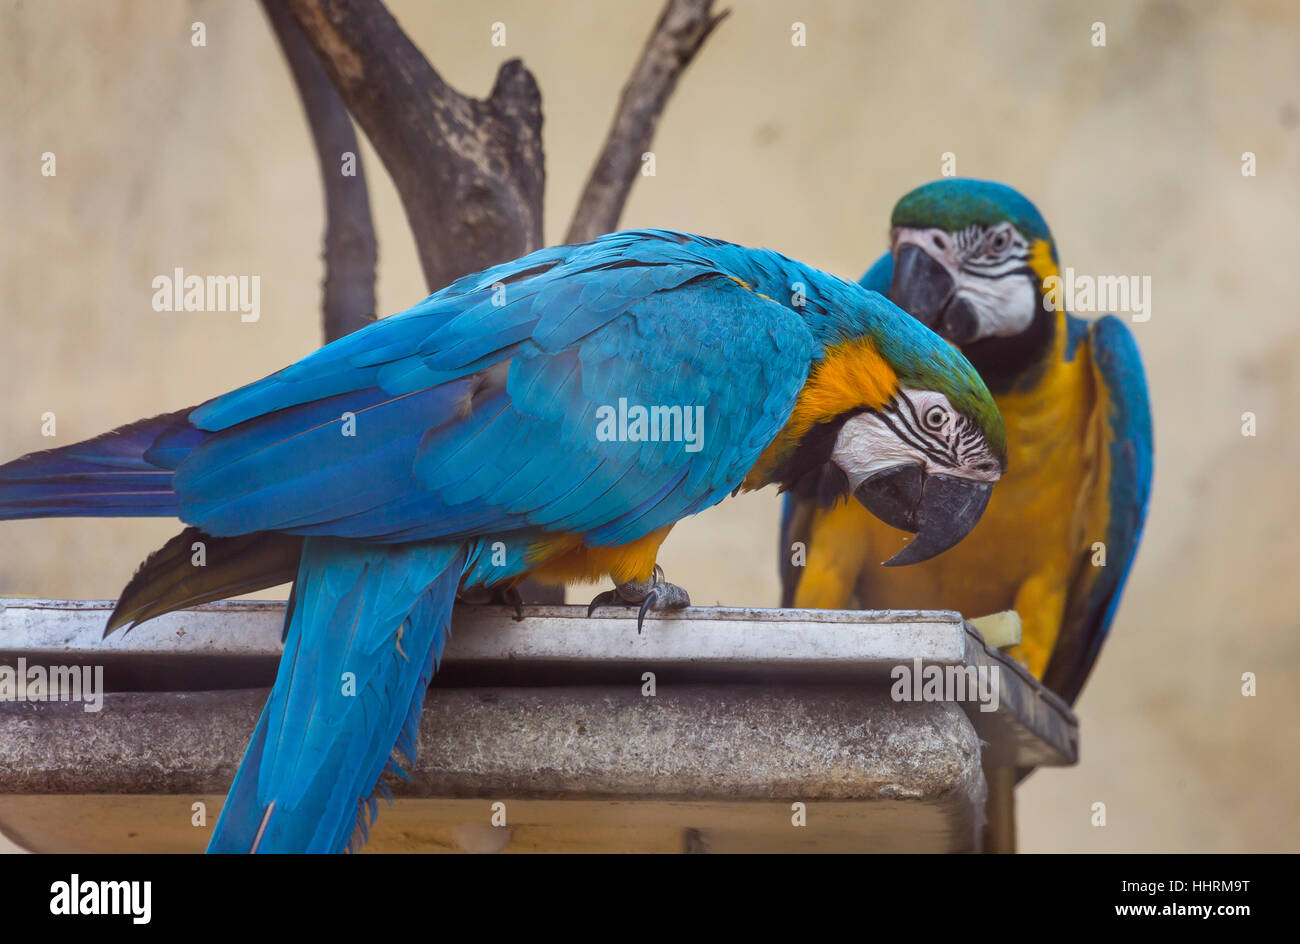 Blue yellow macaw birds in the process of eating fruits at a bird sanctuary in India. Stock Photo